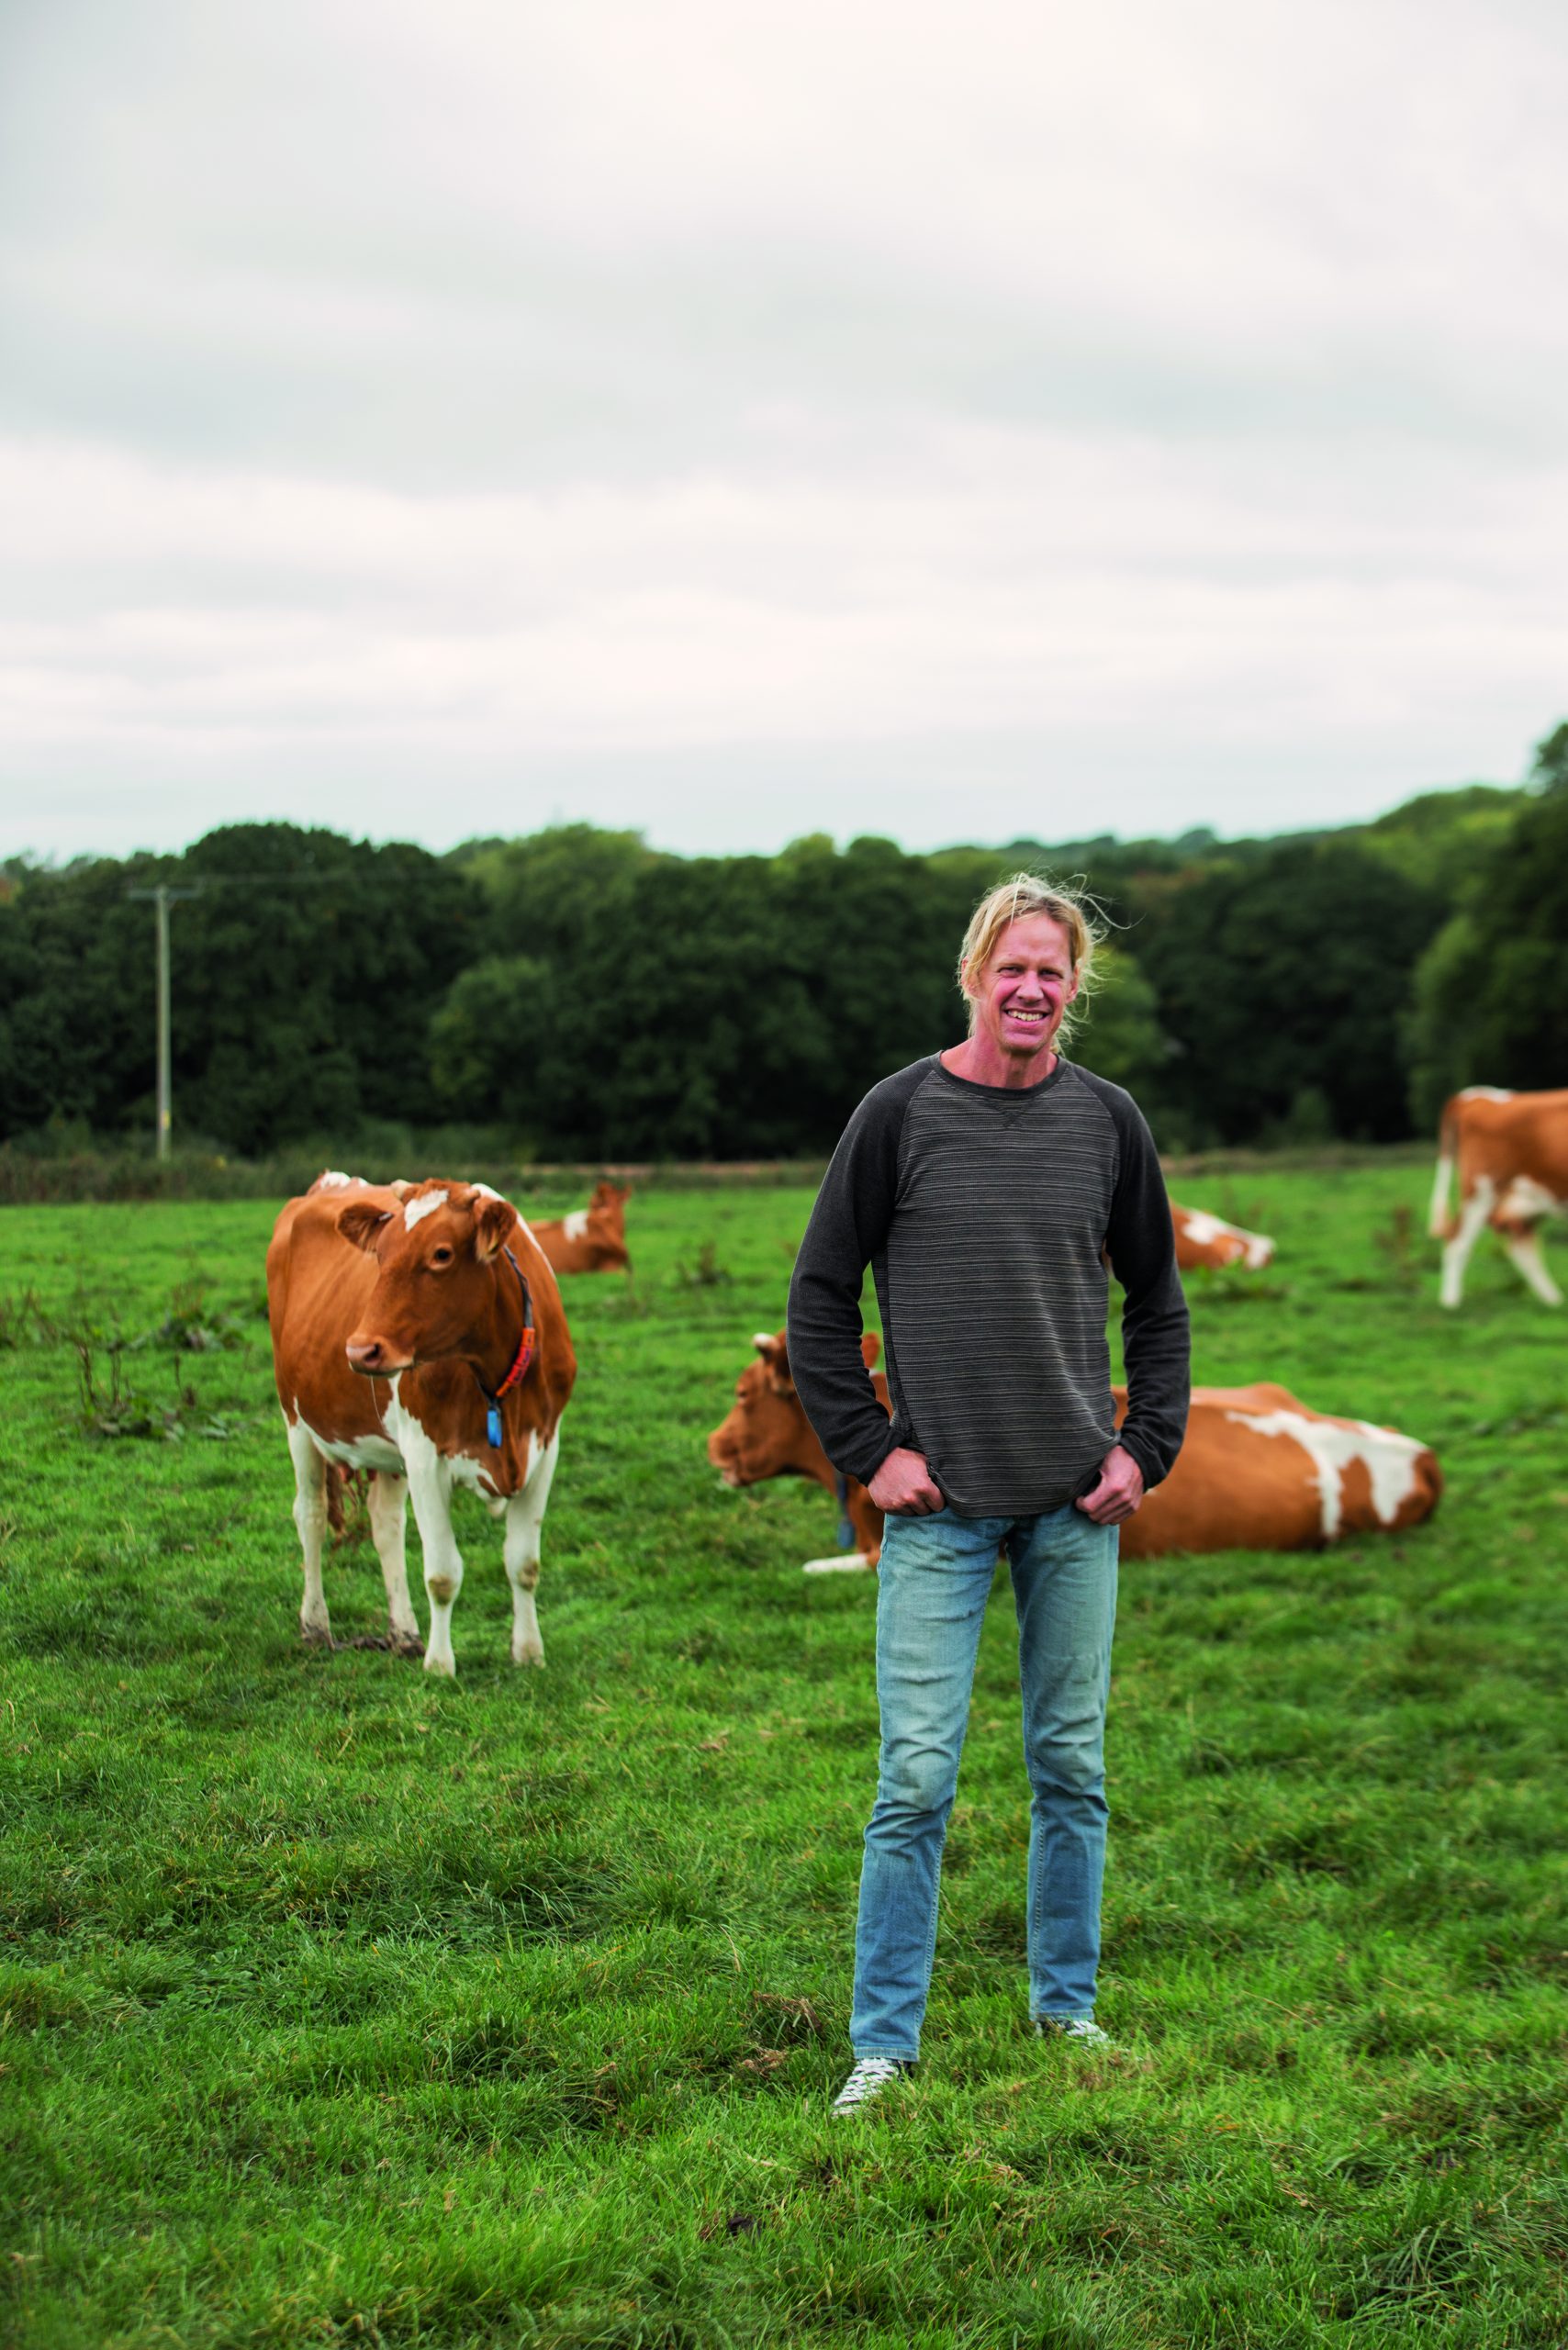 Paul from Briddlesford Farm standing in a field of cows